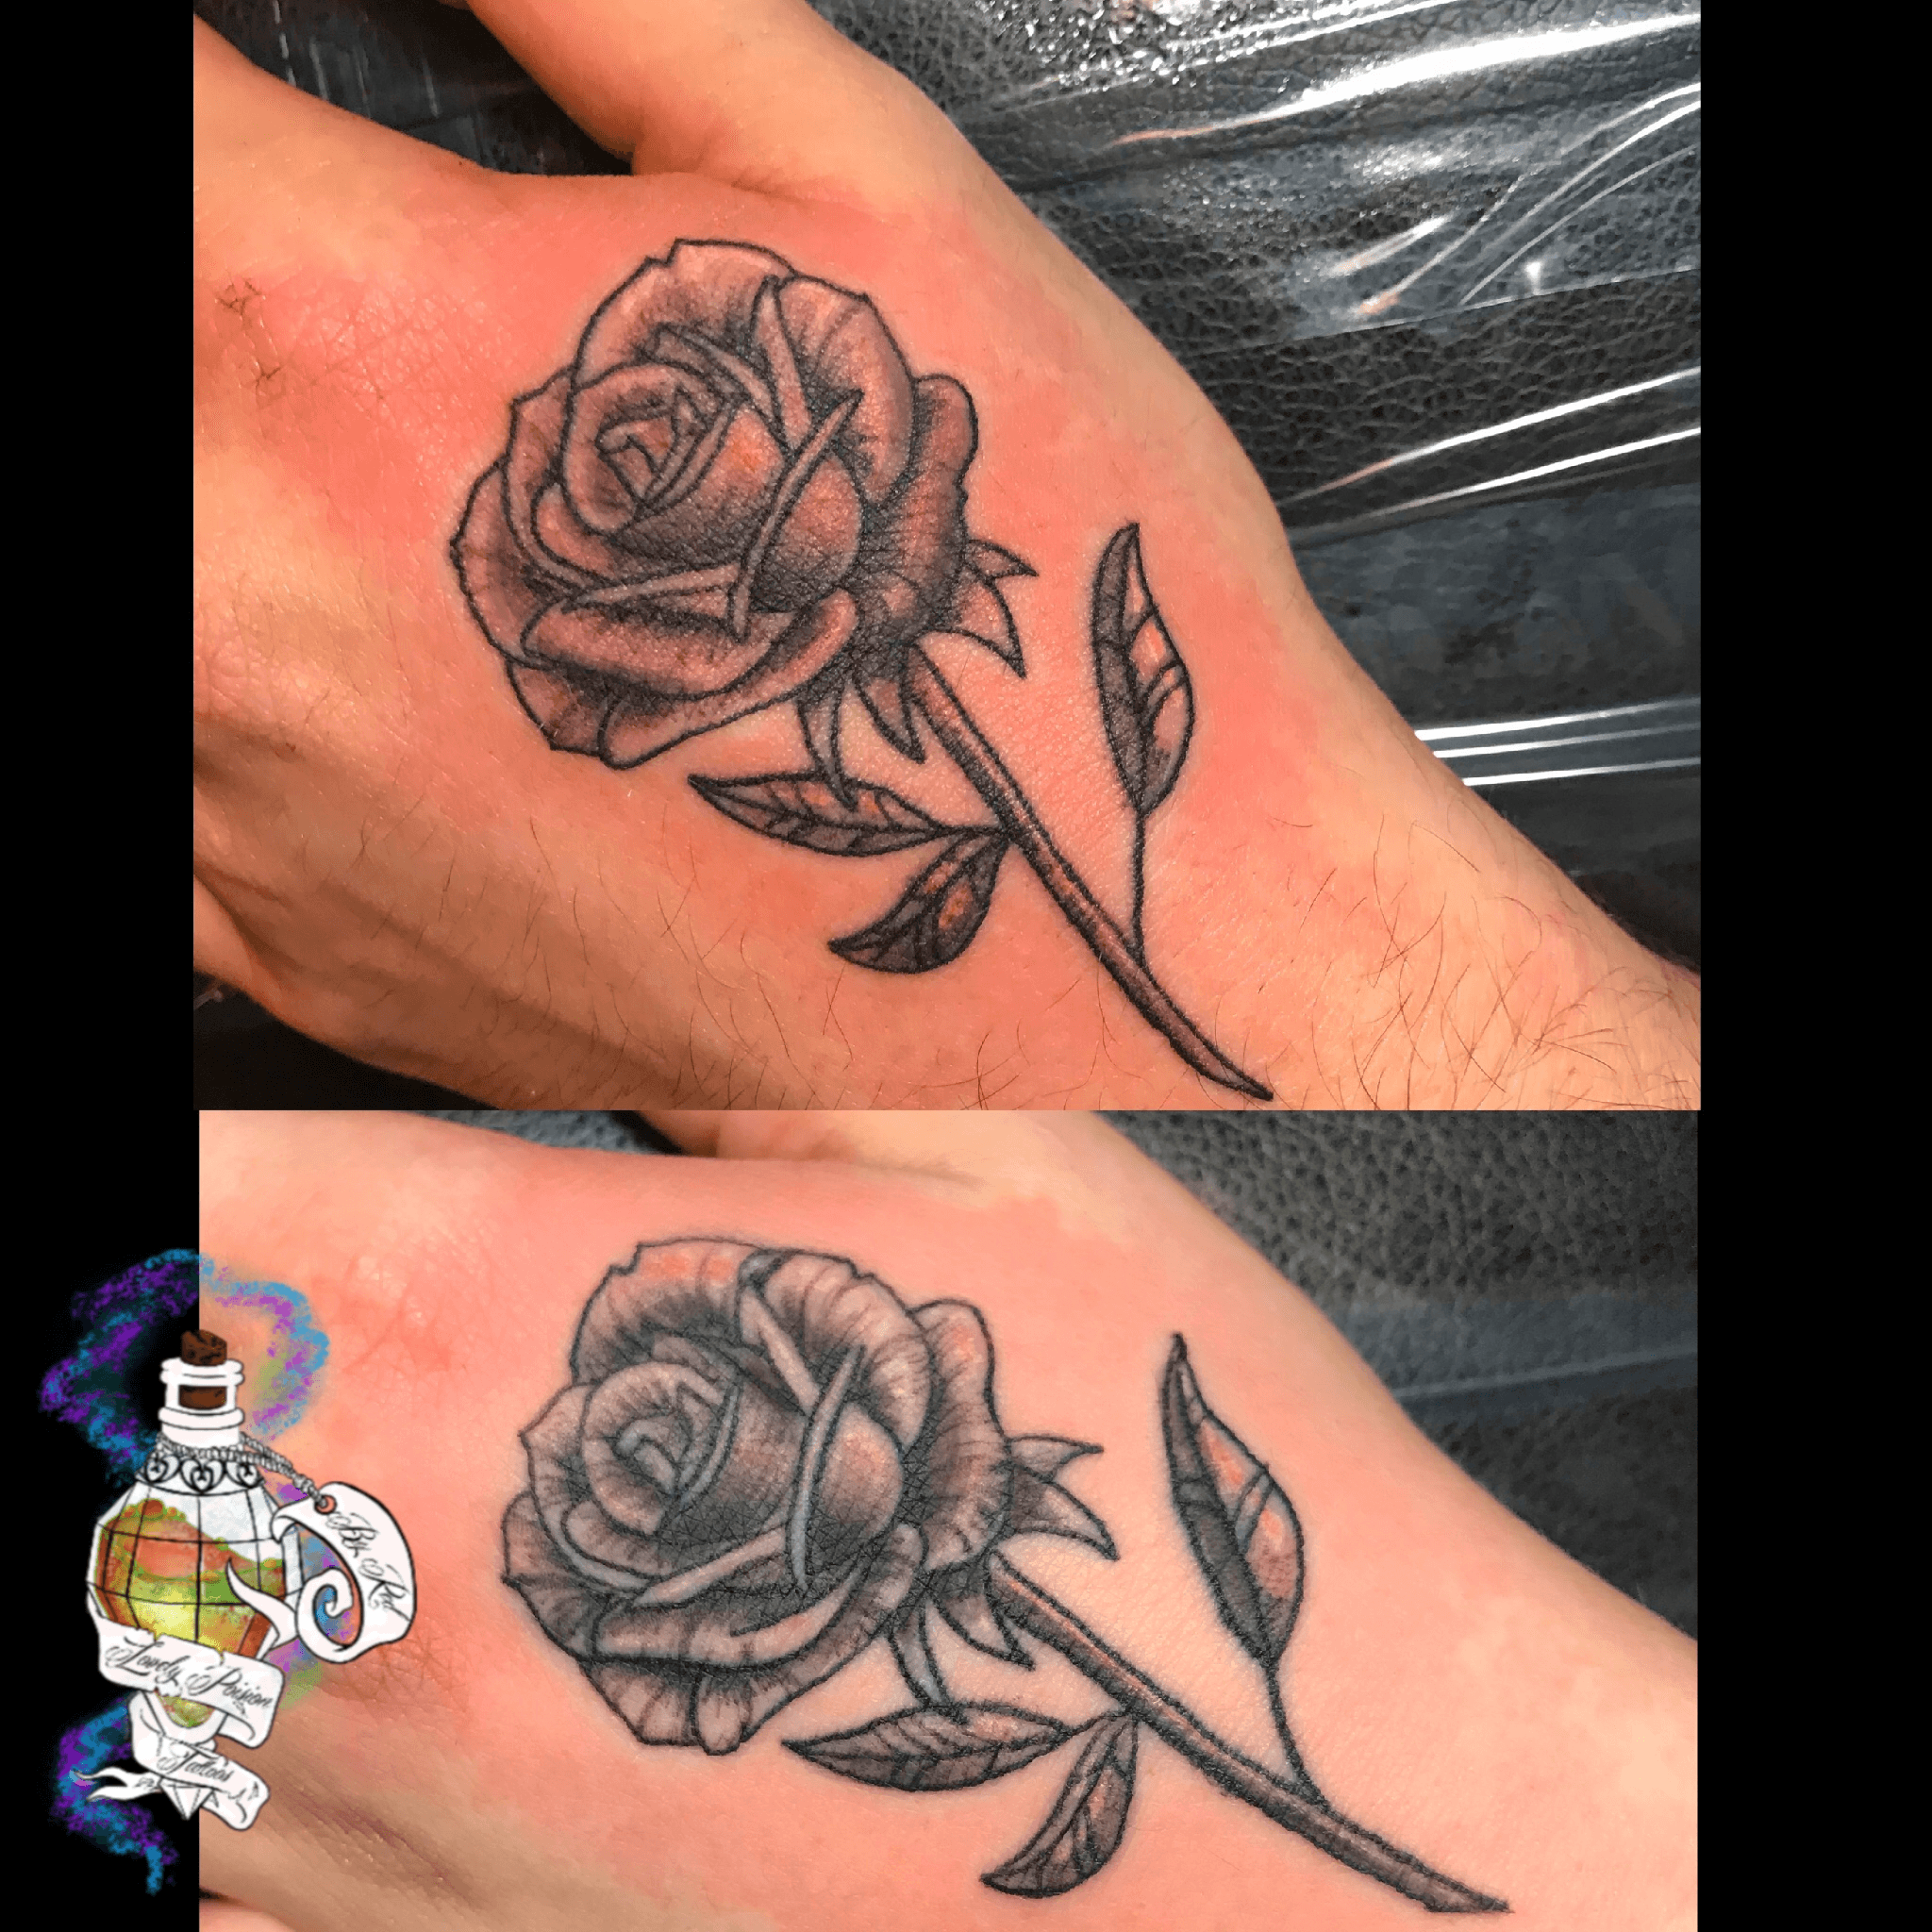 Celeb Tattoo Artist Shares the Trending Couple Tattoos in 2021